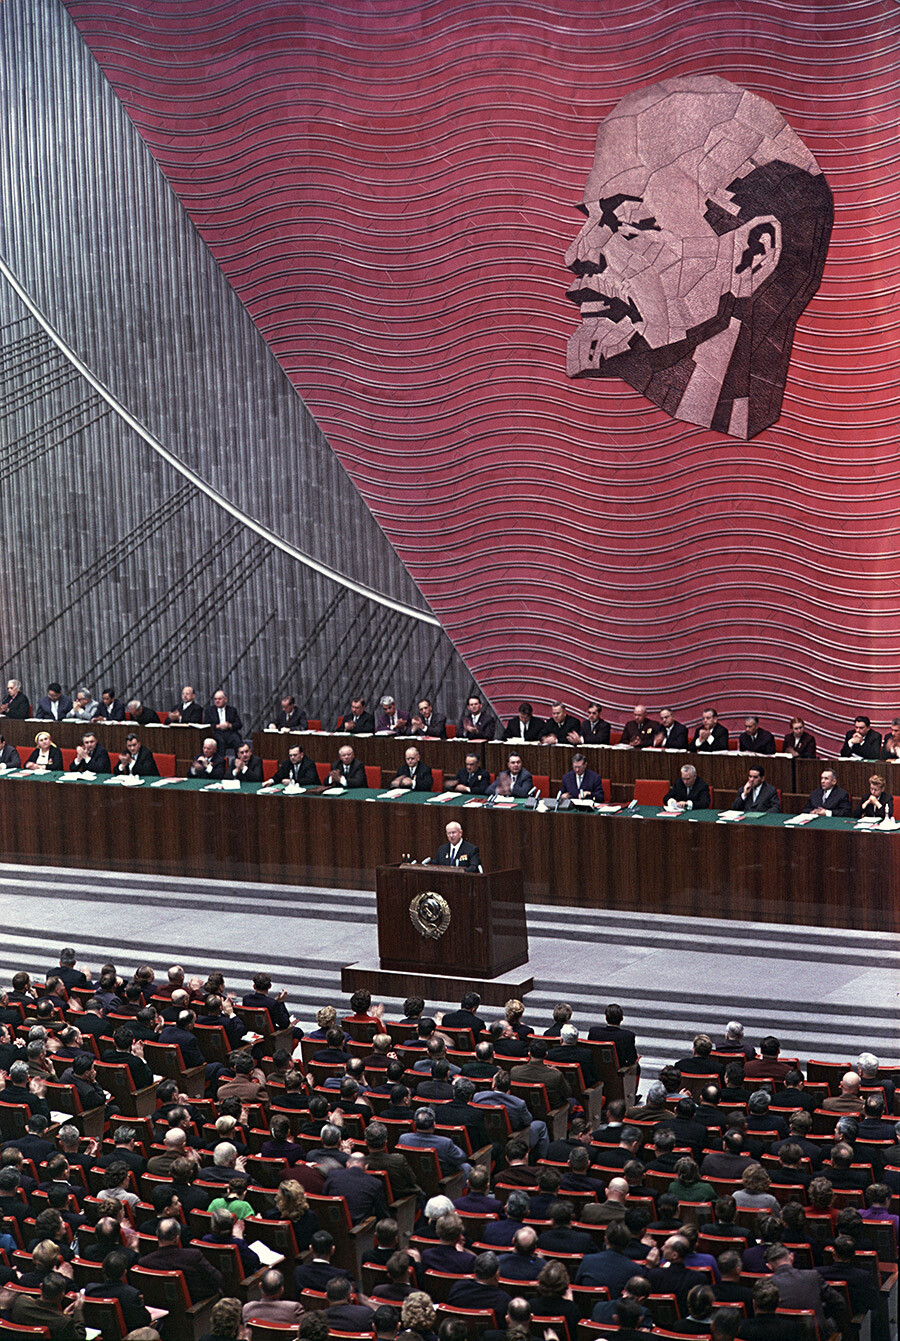 The XXII Congress of the Communist Party of the Soviet Union, 1961. Nikita Khrushchev is at the rostrum.